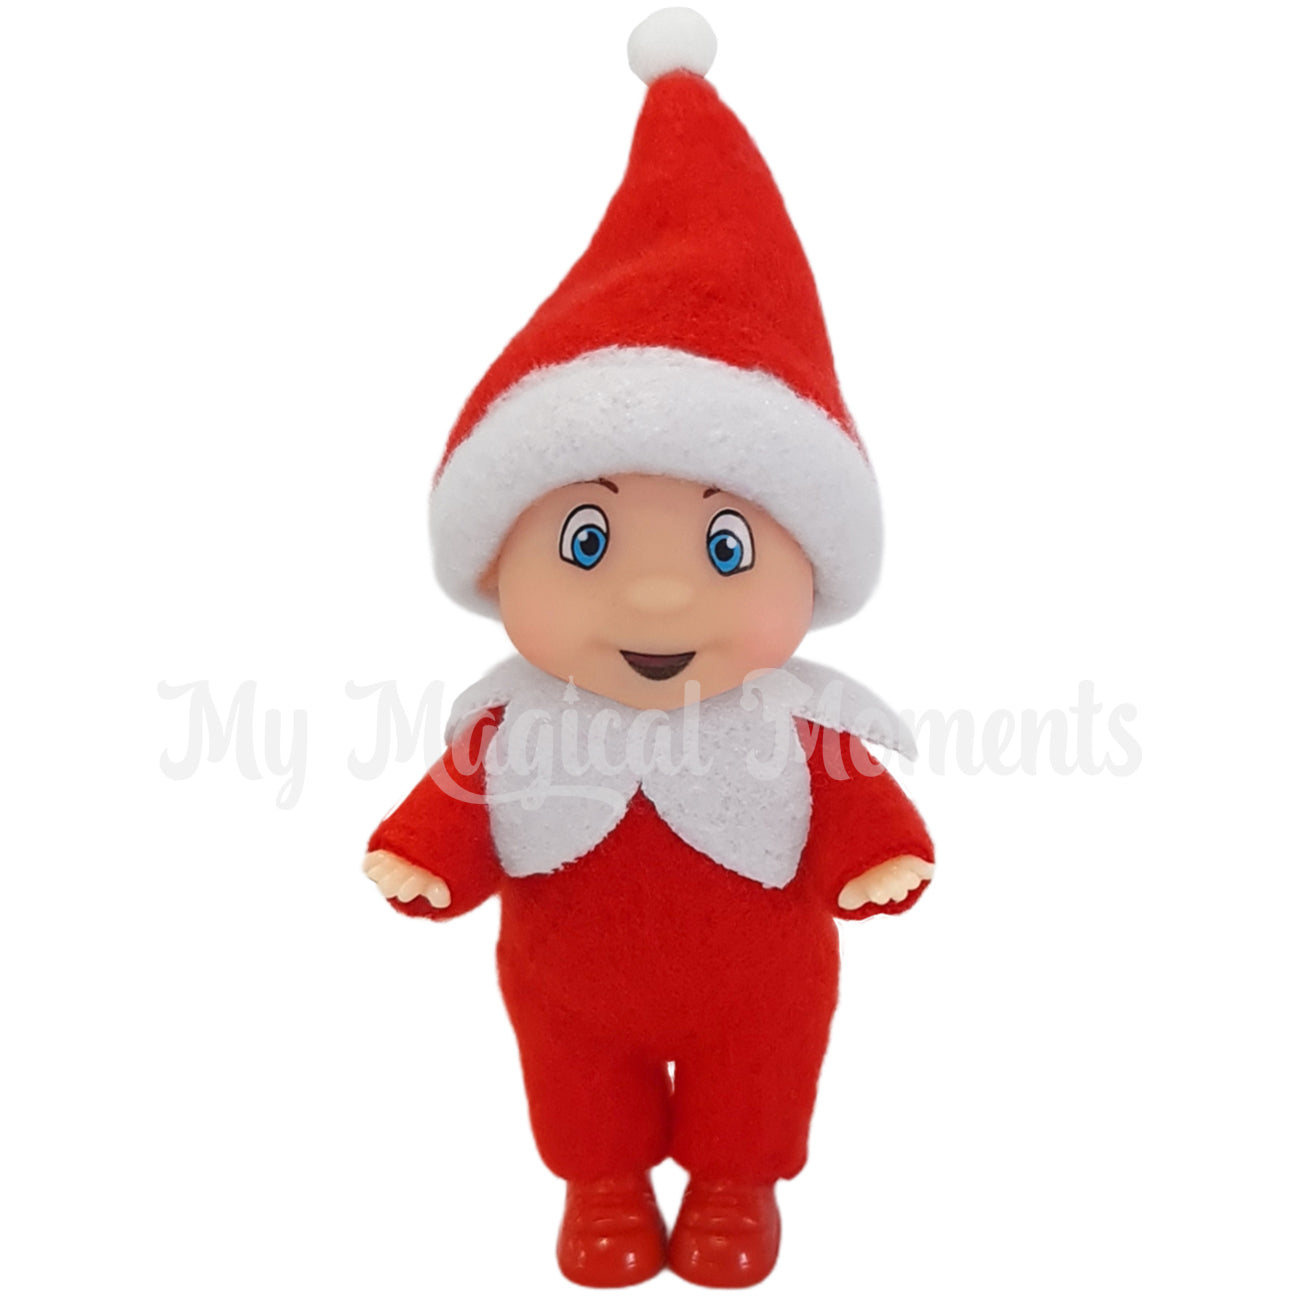 elf baby wearing a red hat